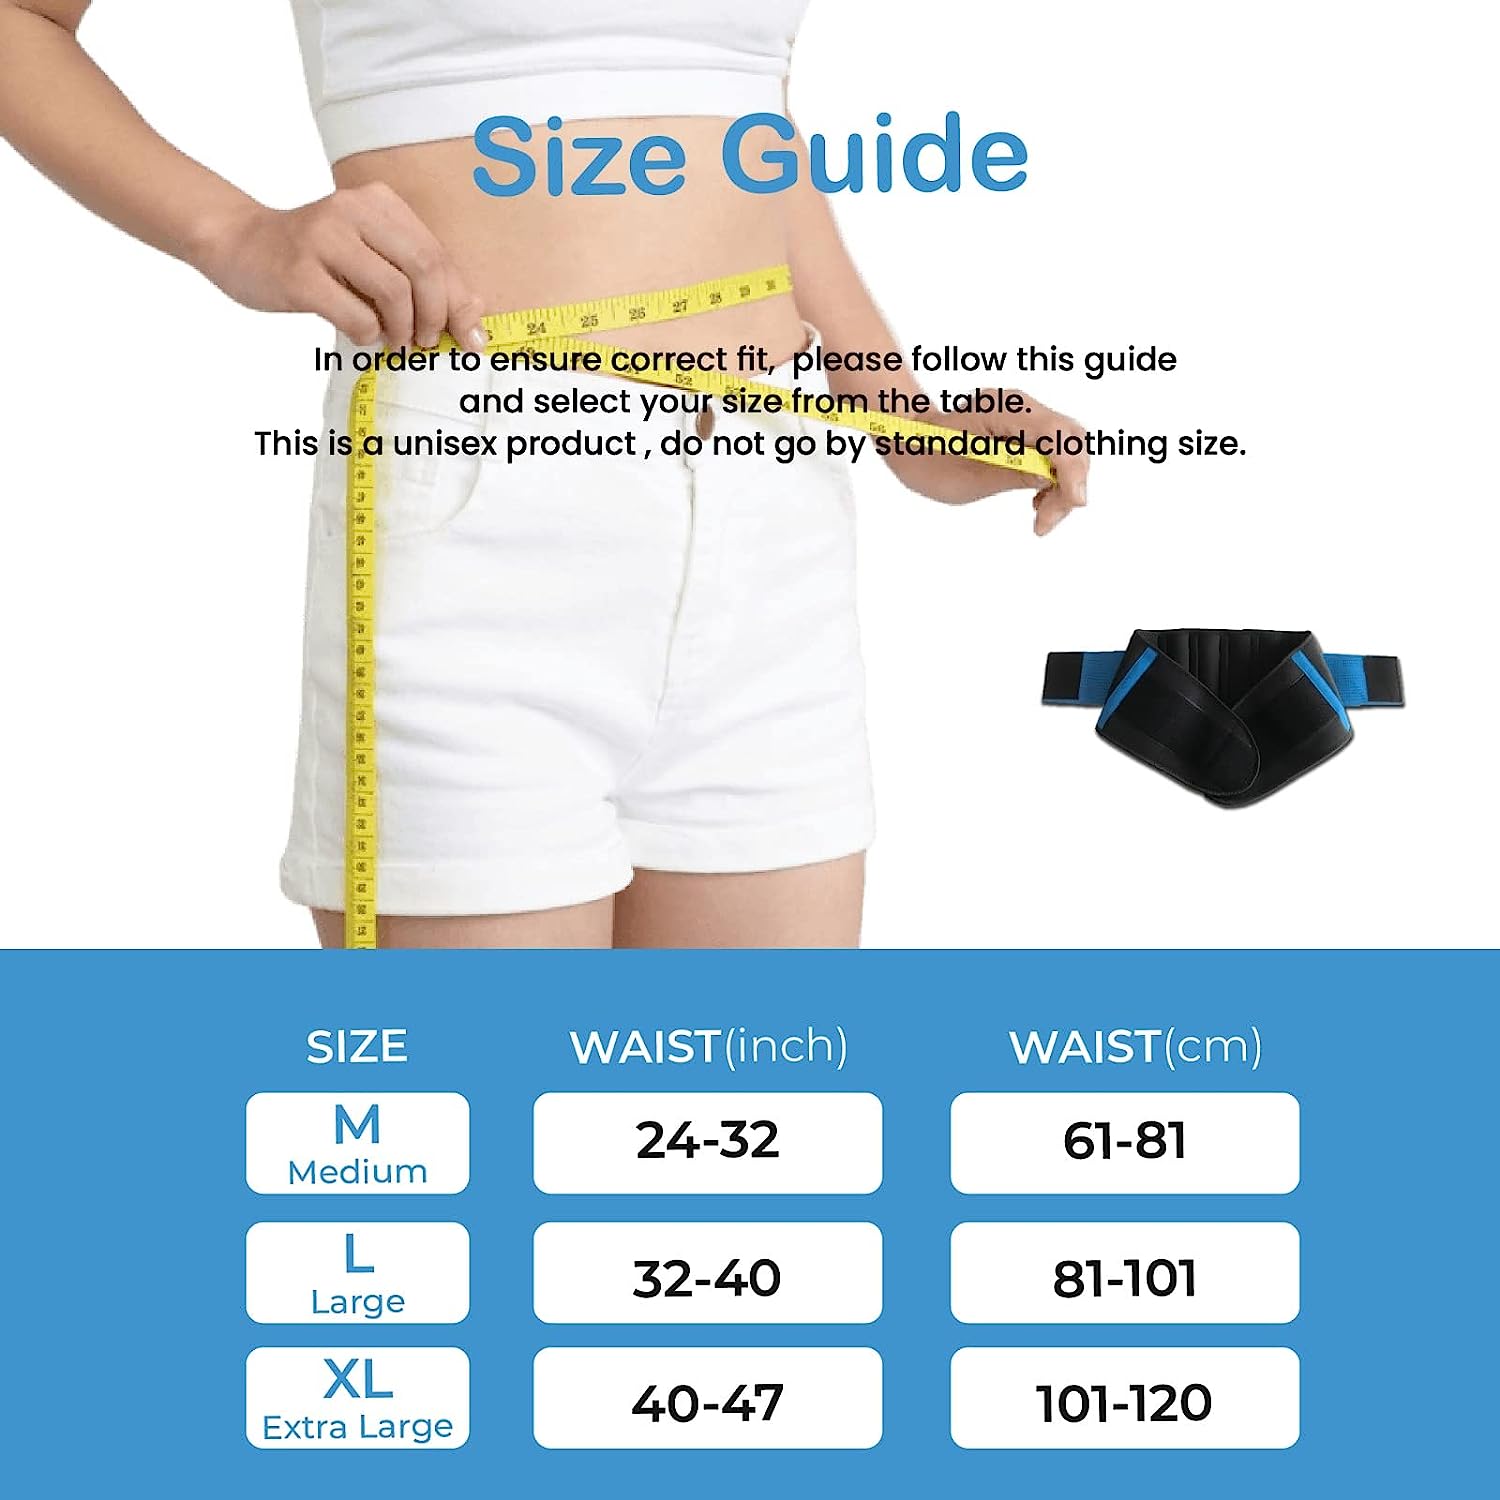 Back Support Belt for Men and Women - The Only Certified Medical Grade Adjustable Lumbar Support Belt - Therapeutic Lower Back Support for Back Pain Relief and Injury Prevention